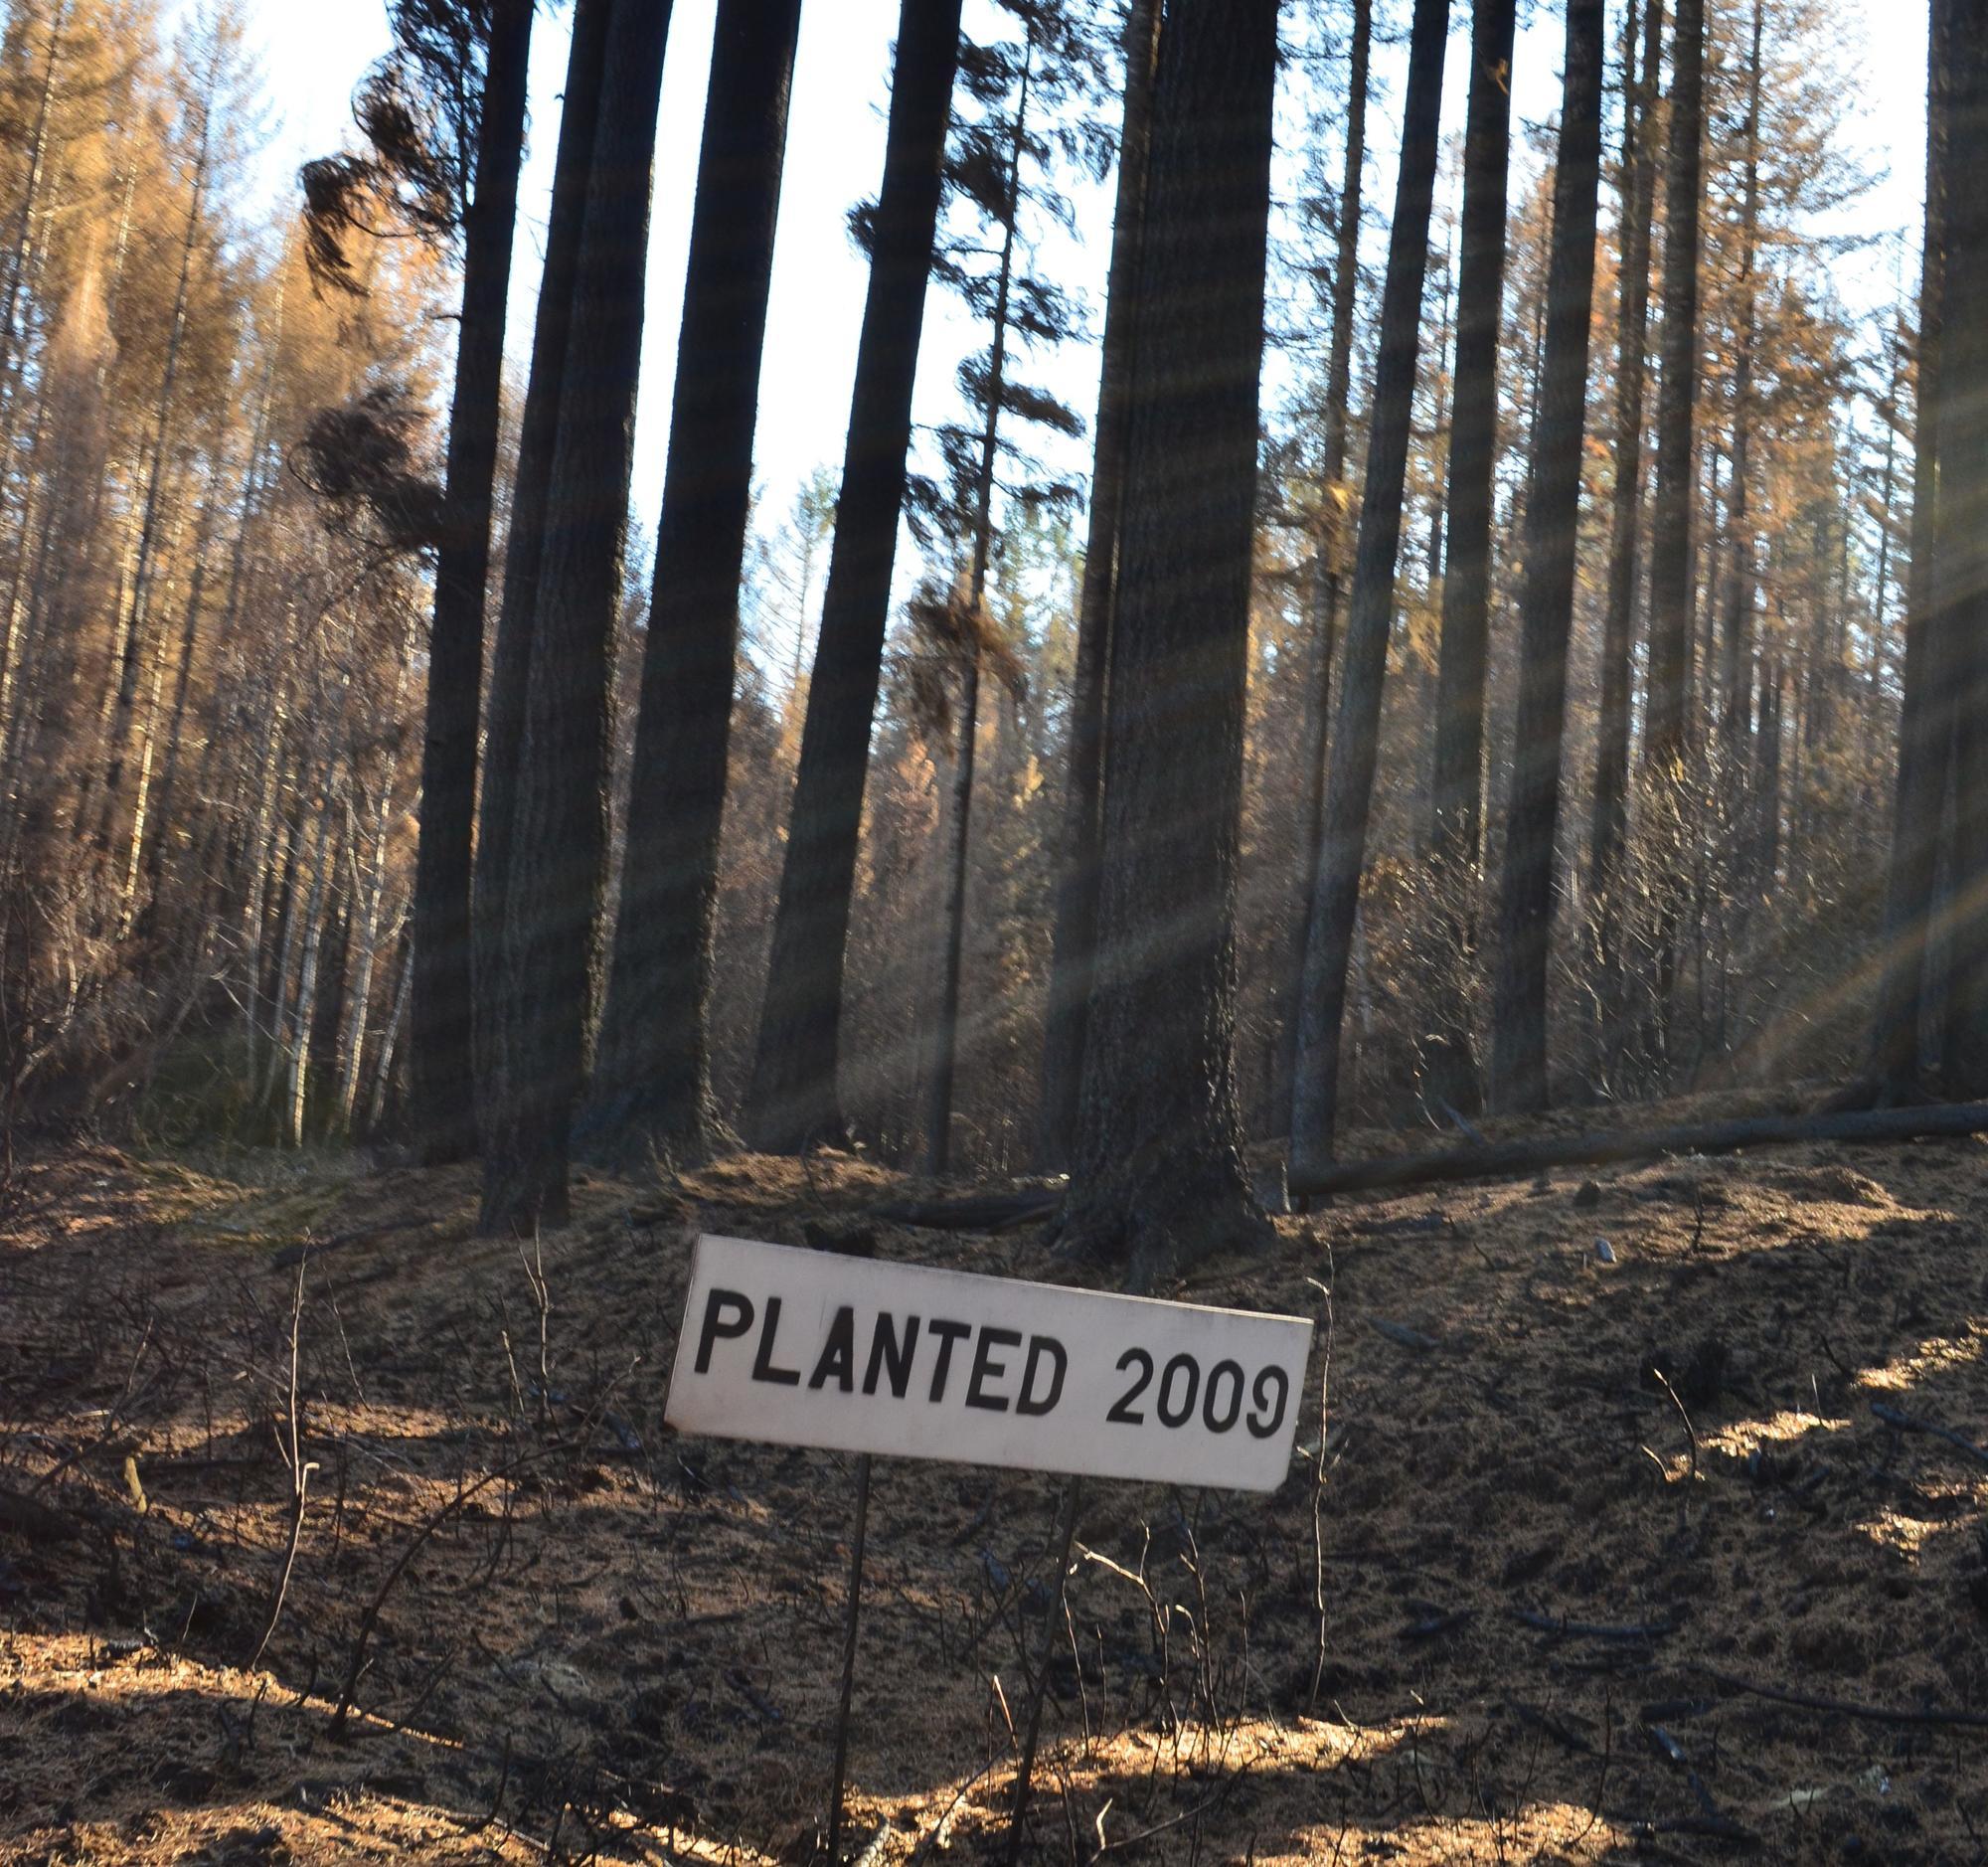 A sign reading "Planted 2009" stands in cleared forest area with mature trees in the background.